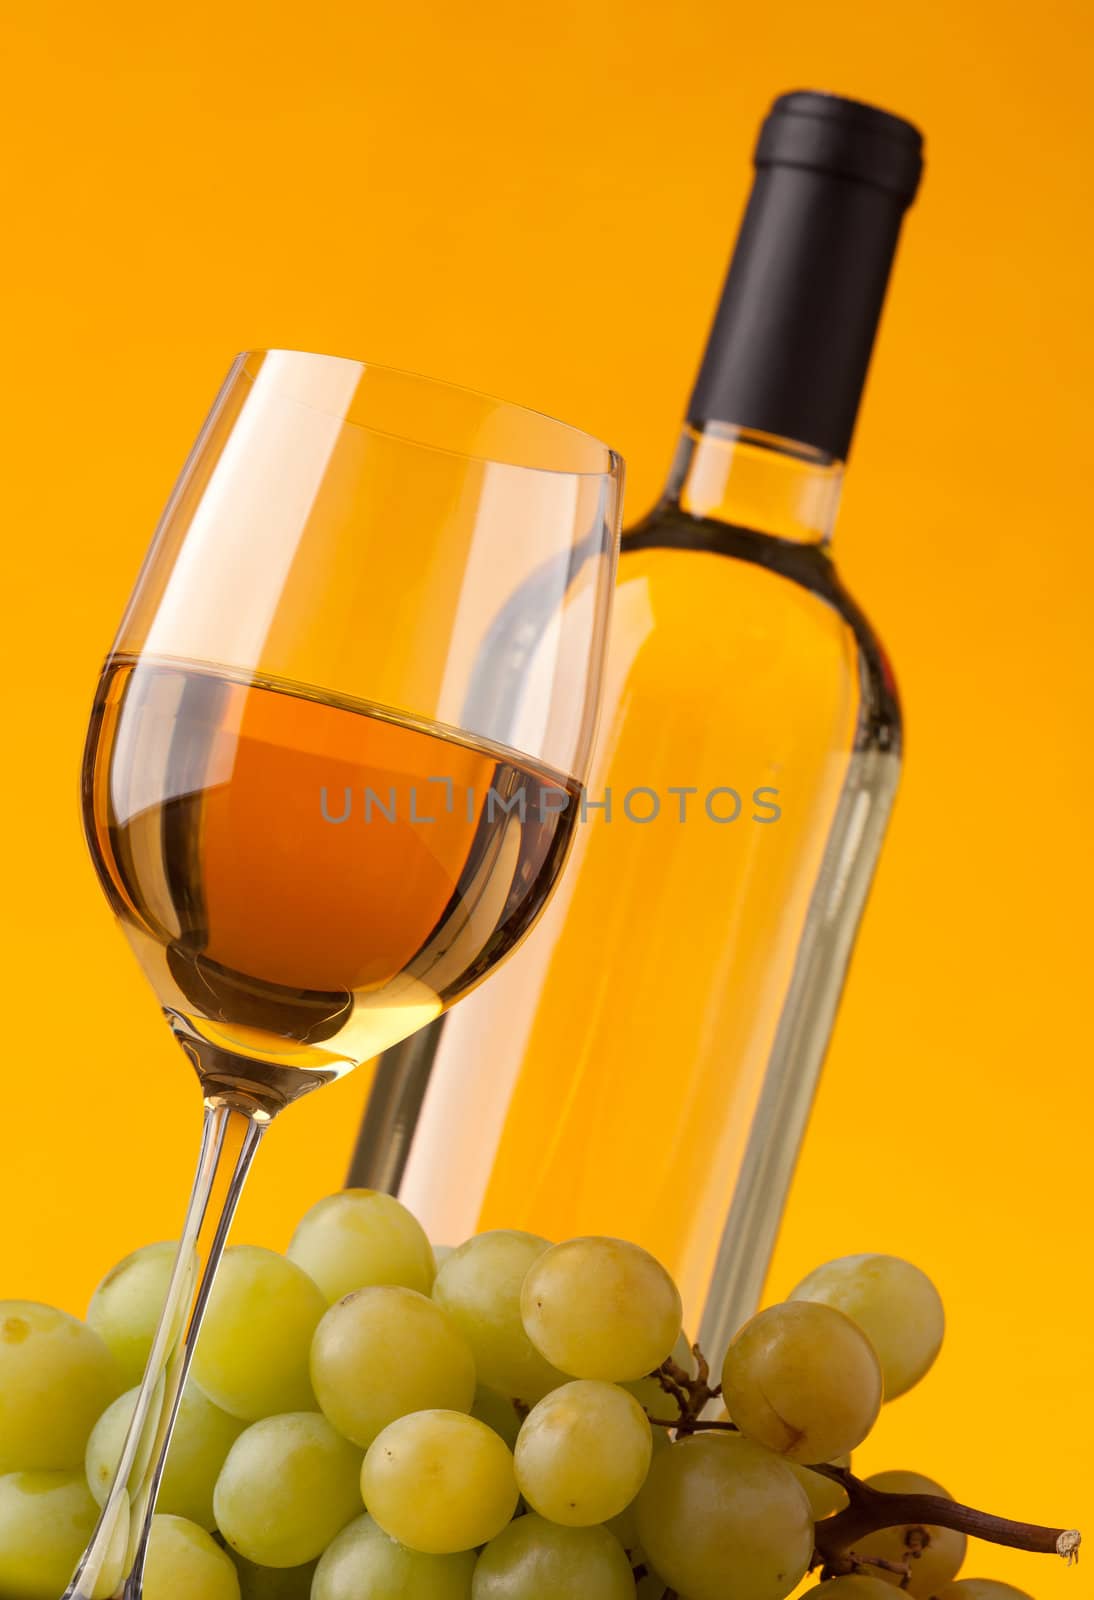 Bottom view of a glass of white wine bottle and grapes on a yellow background